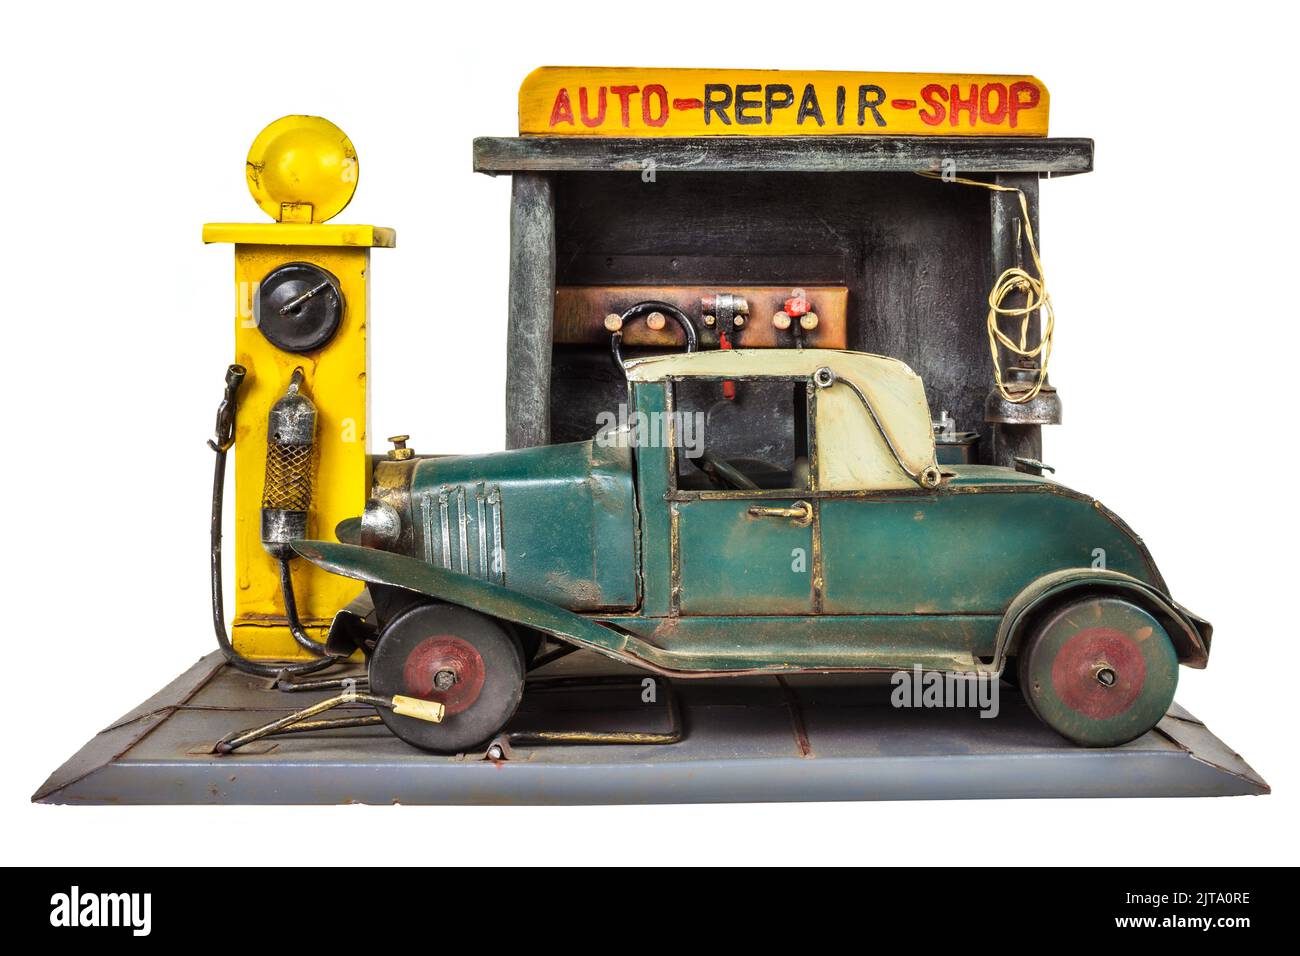 Retro toy car repair shop isolated on a white background Stock Photo